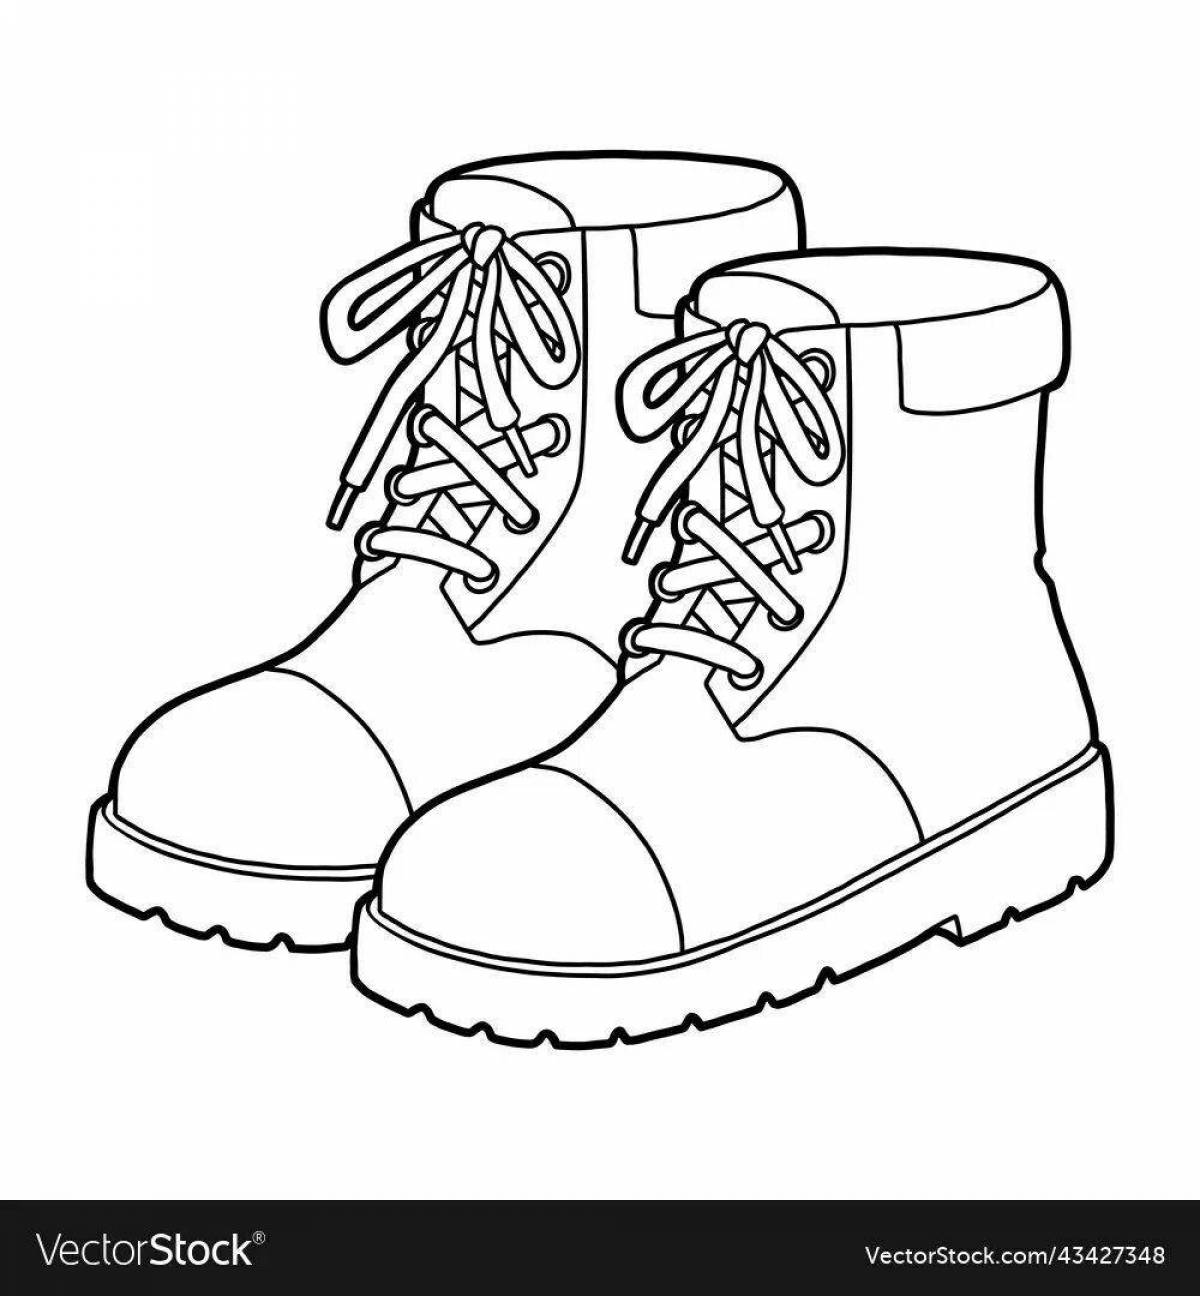 Coloring page spectacular shoes for children 4-5 years old